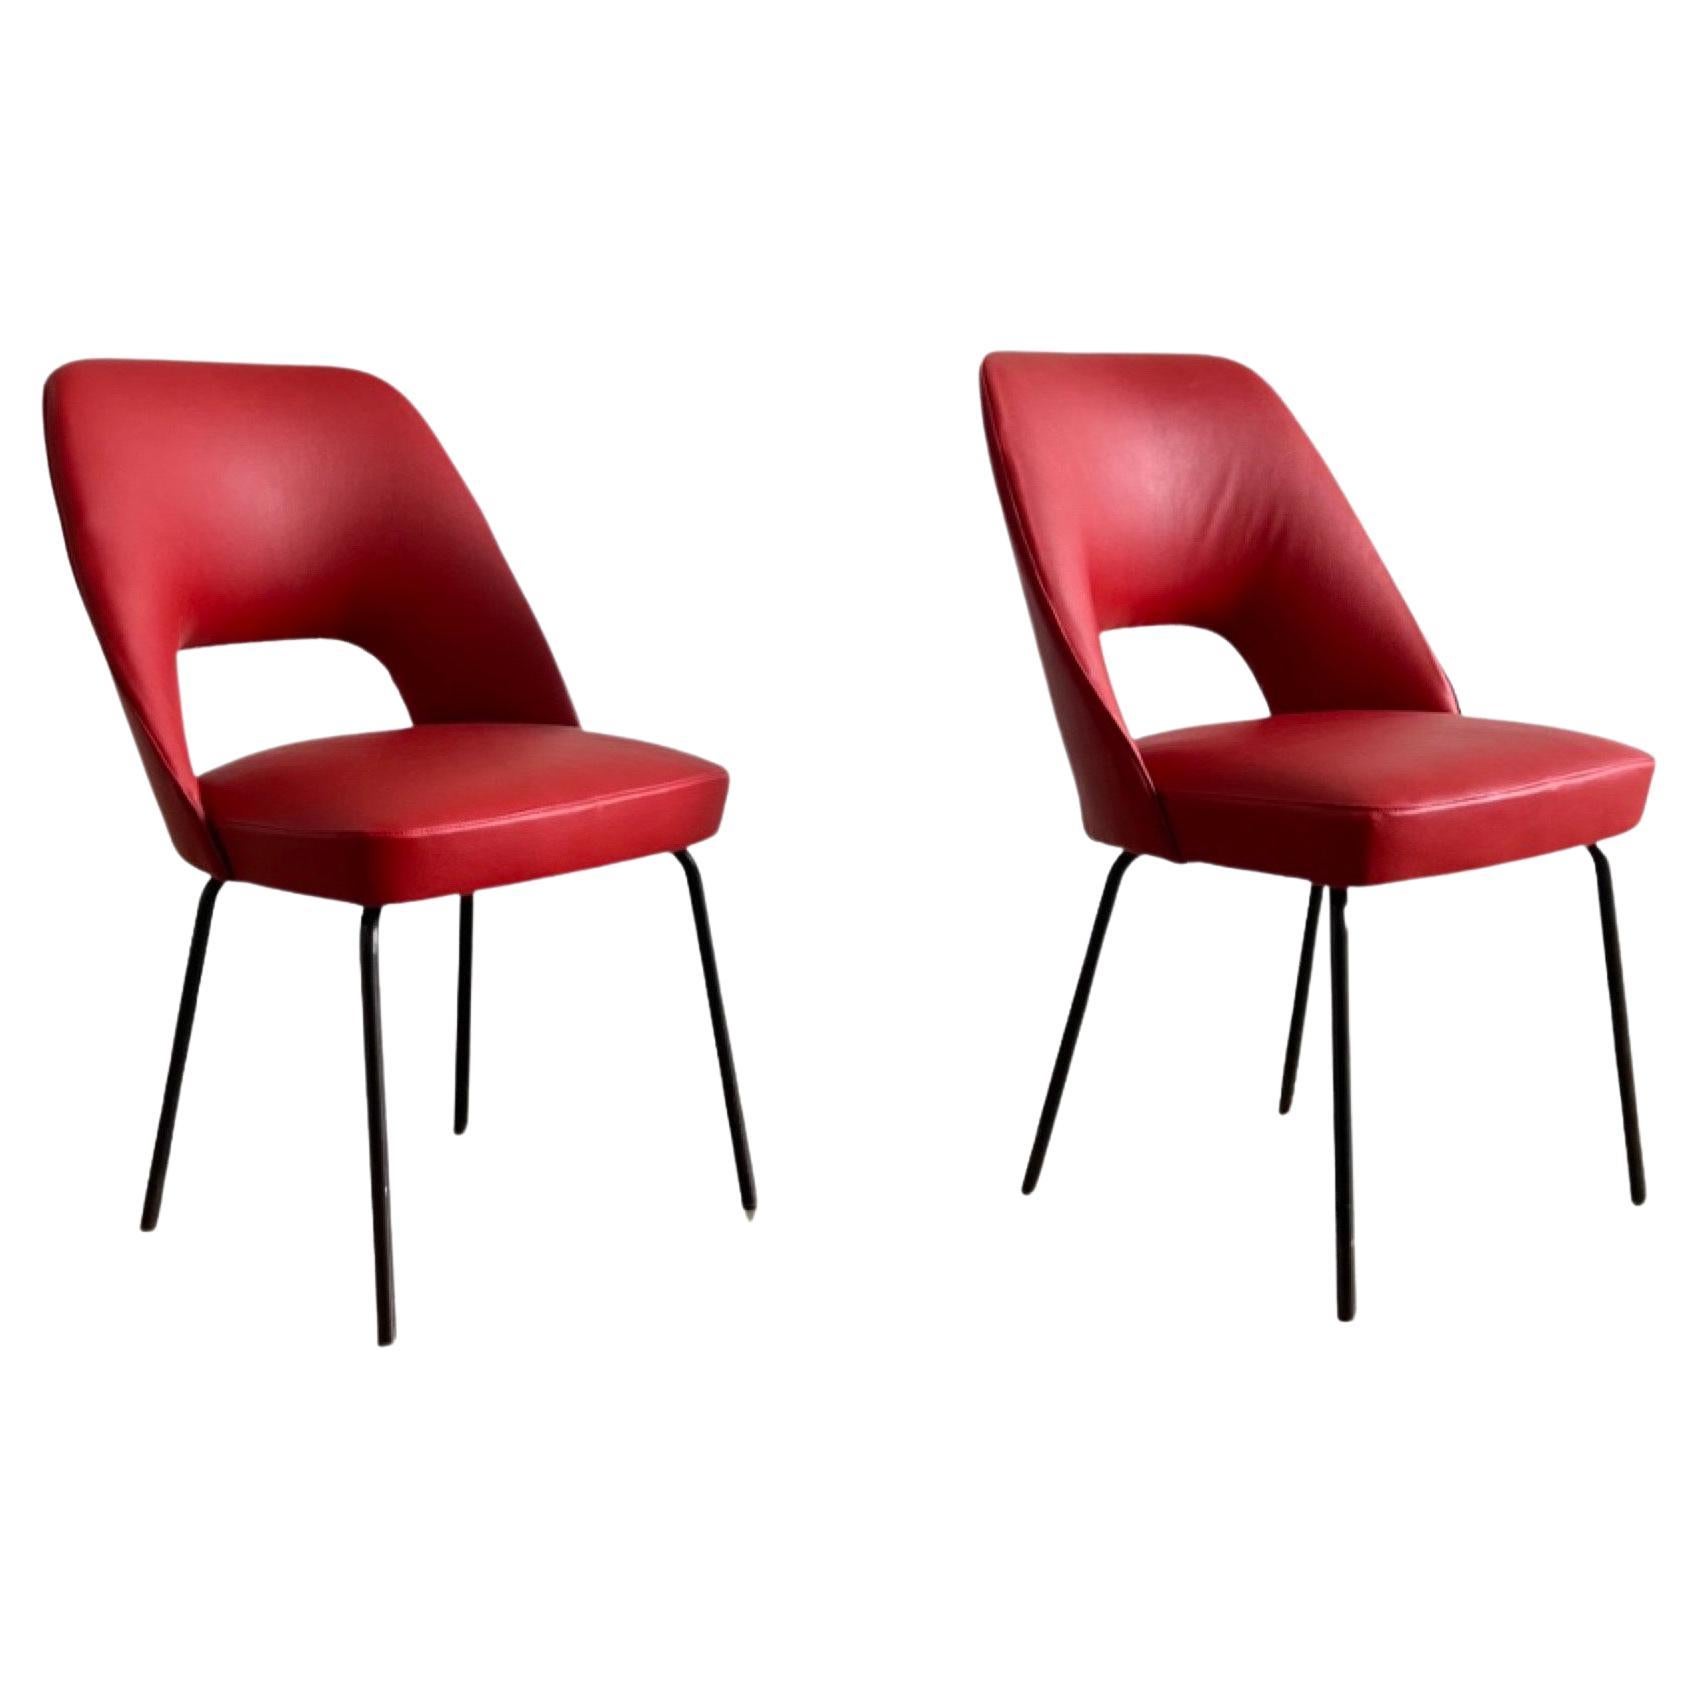 Italian, Mobiltecnica Torino Leather Chairs For Sale